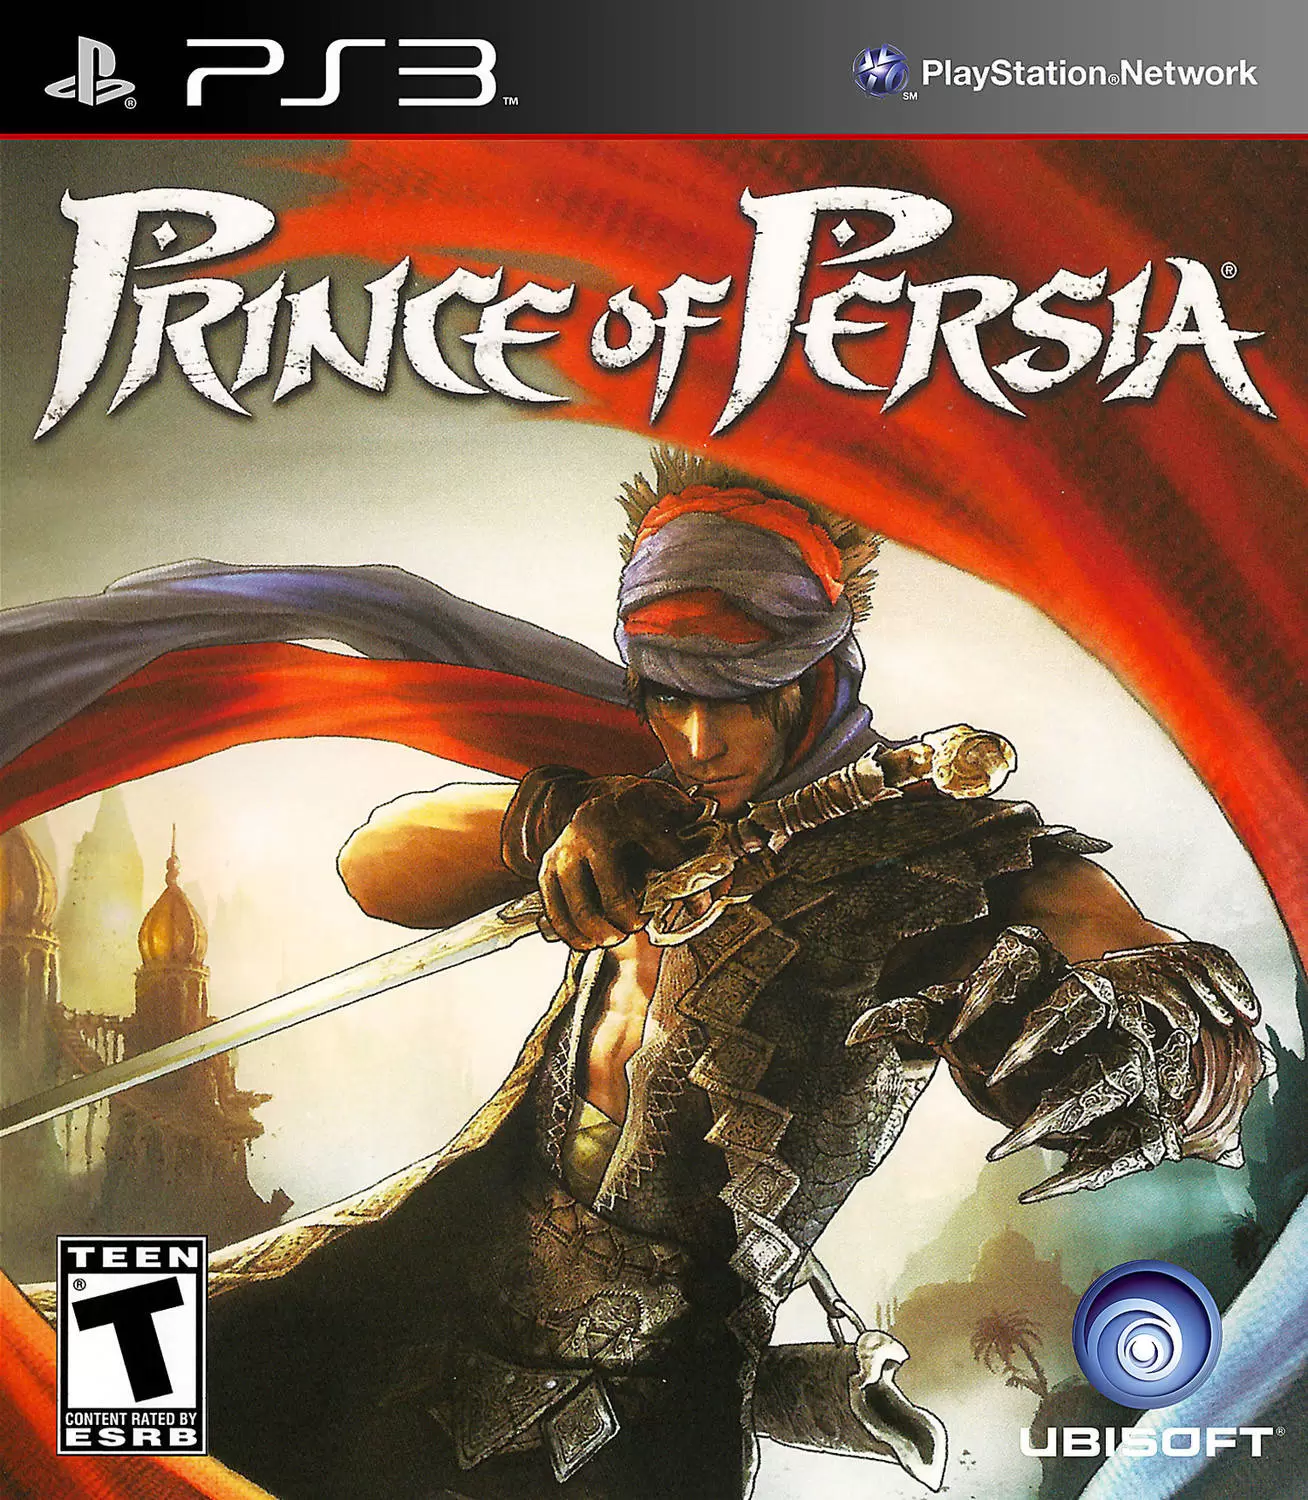 Jeux PS3 - Prince of Persia (2008)